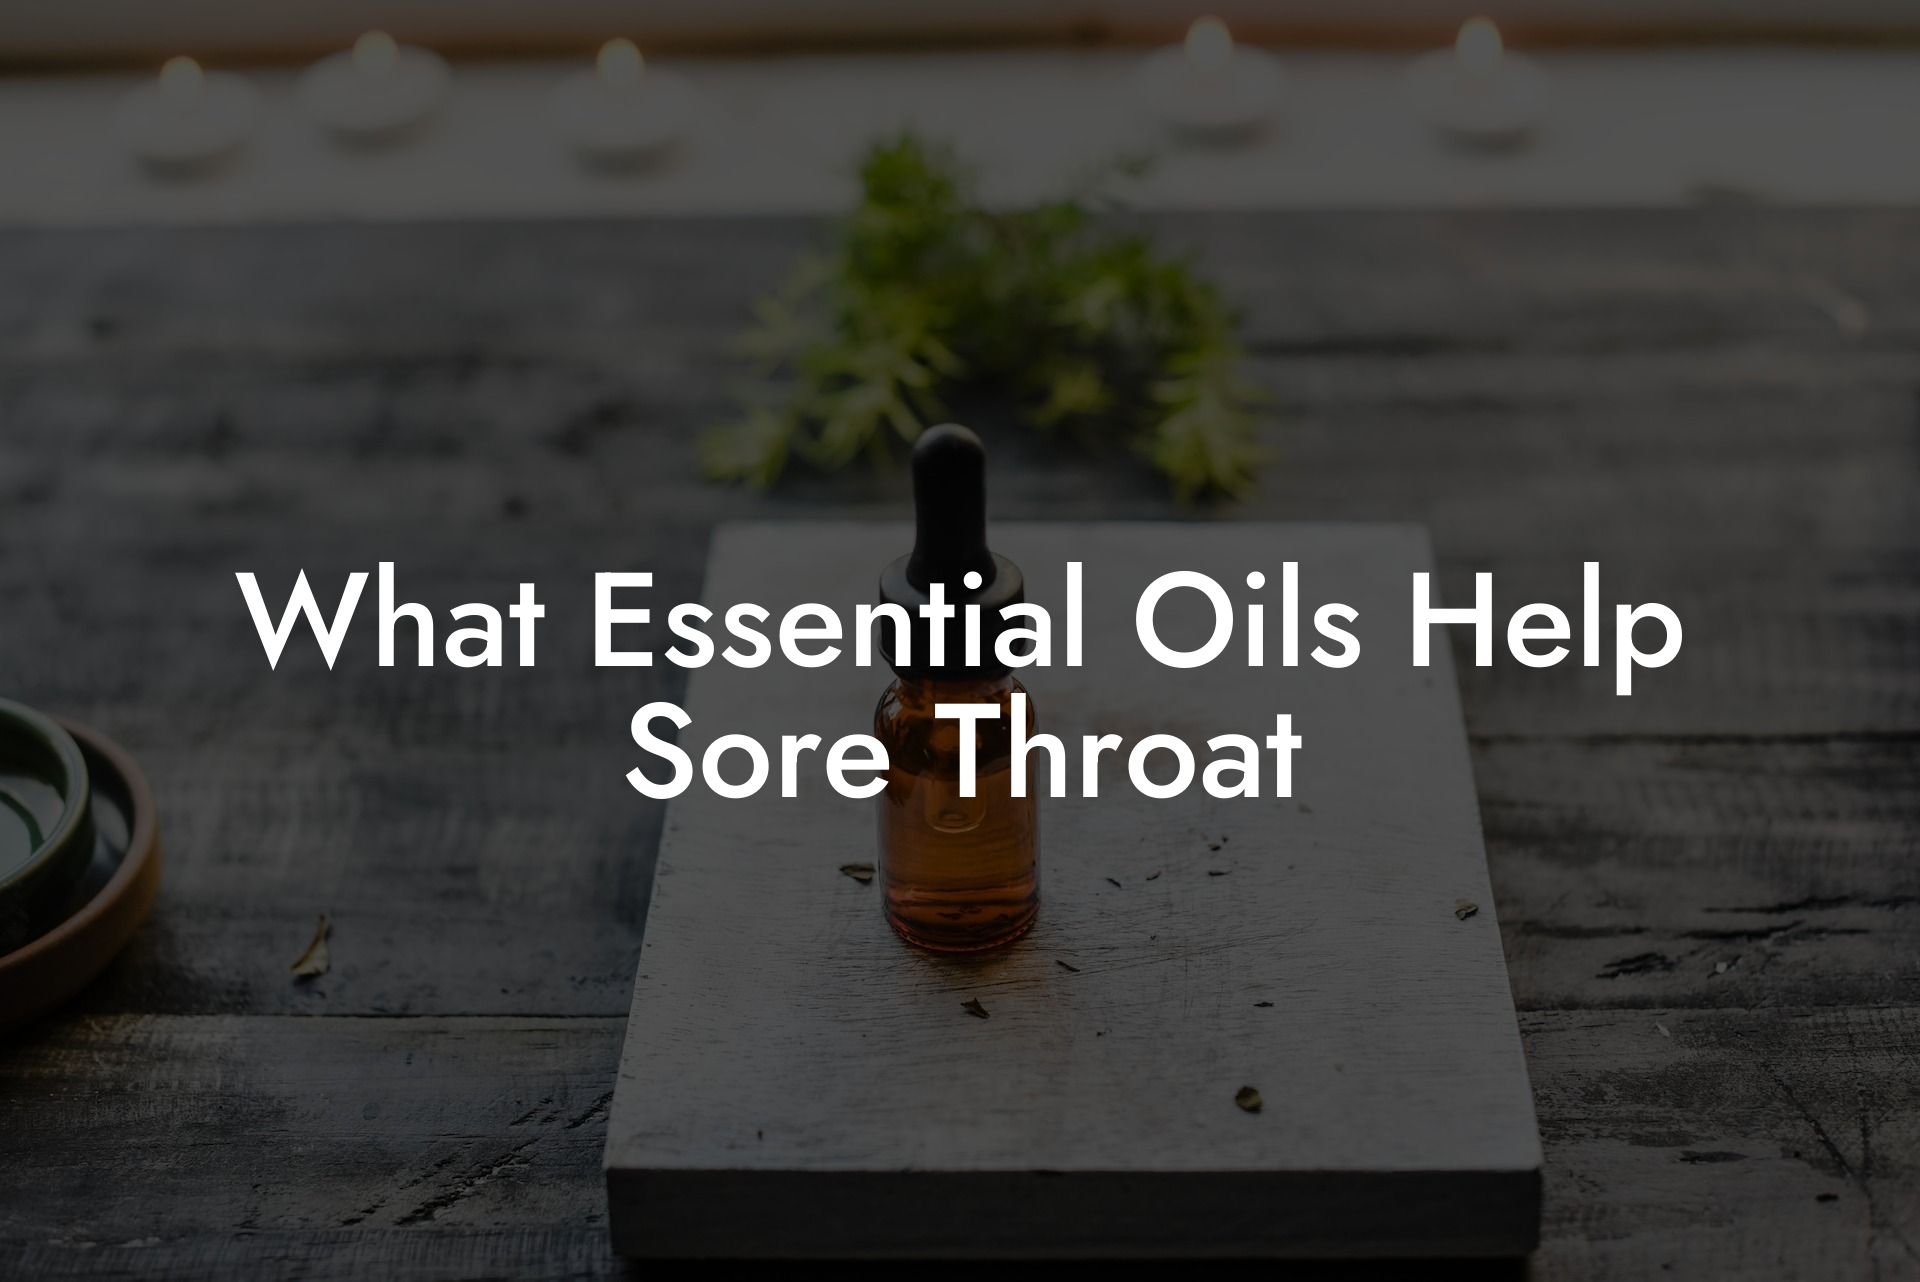 What Essential Oils Help Sore Throat